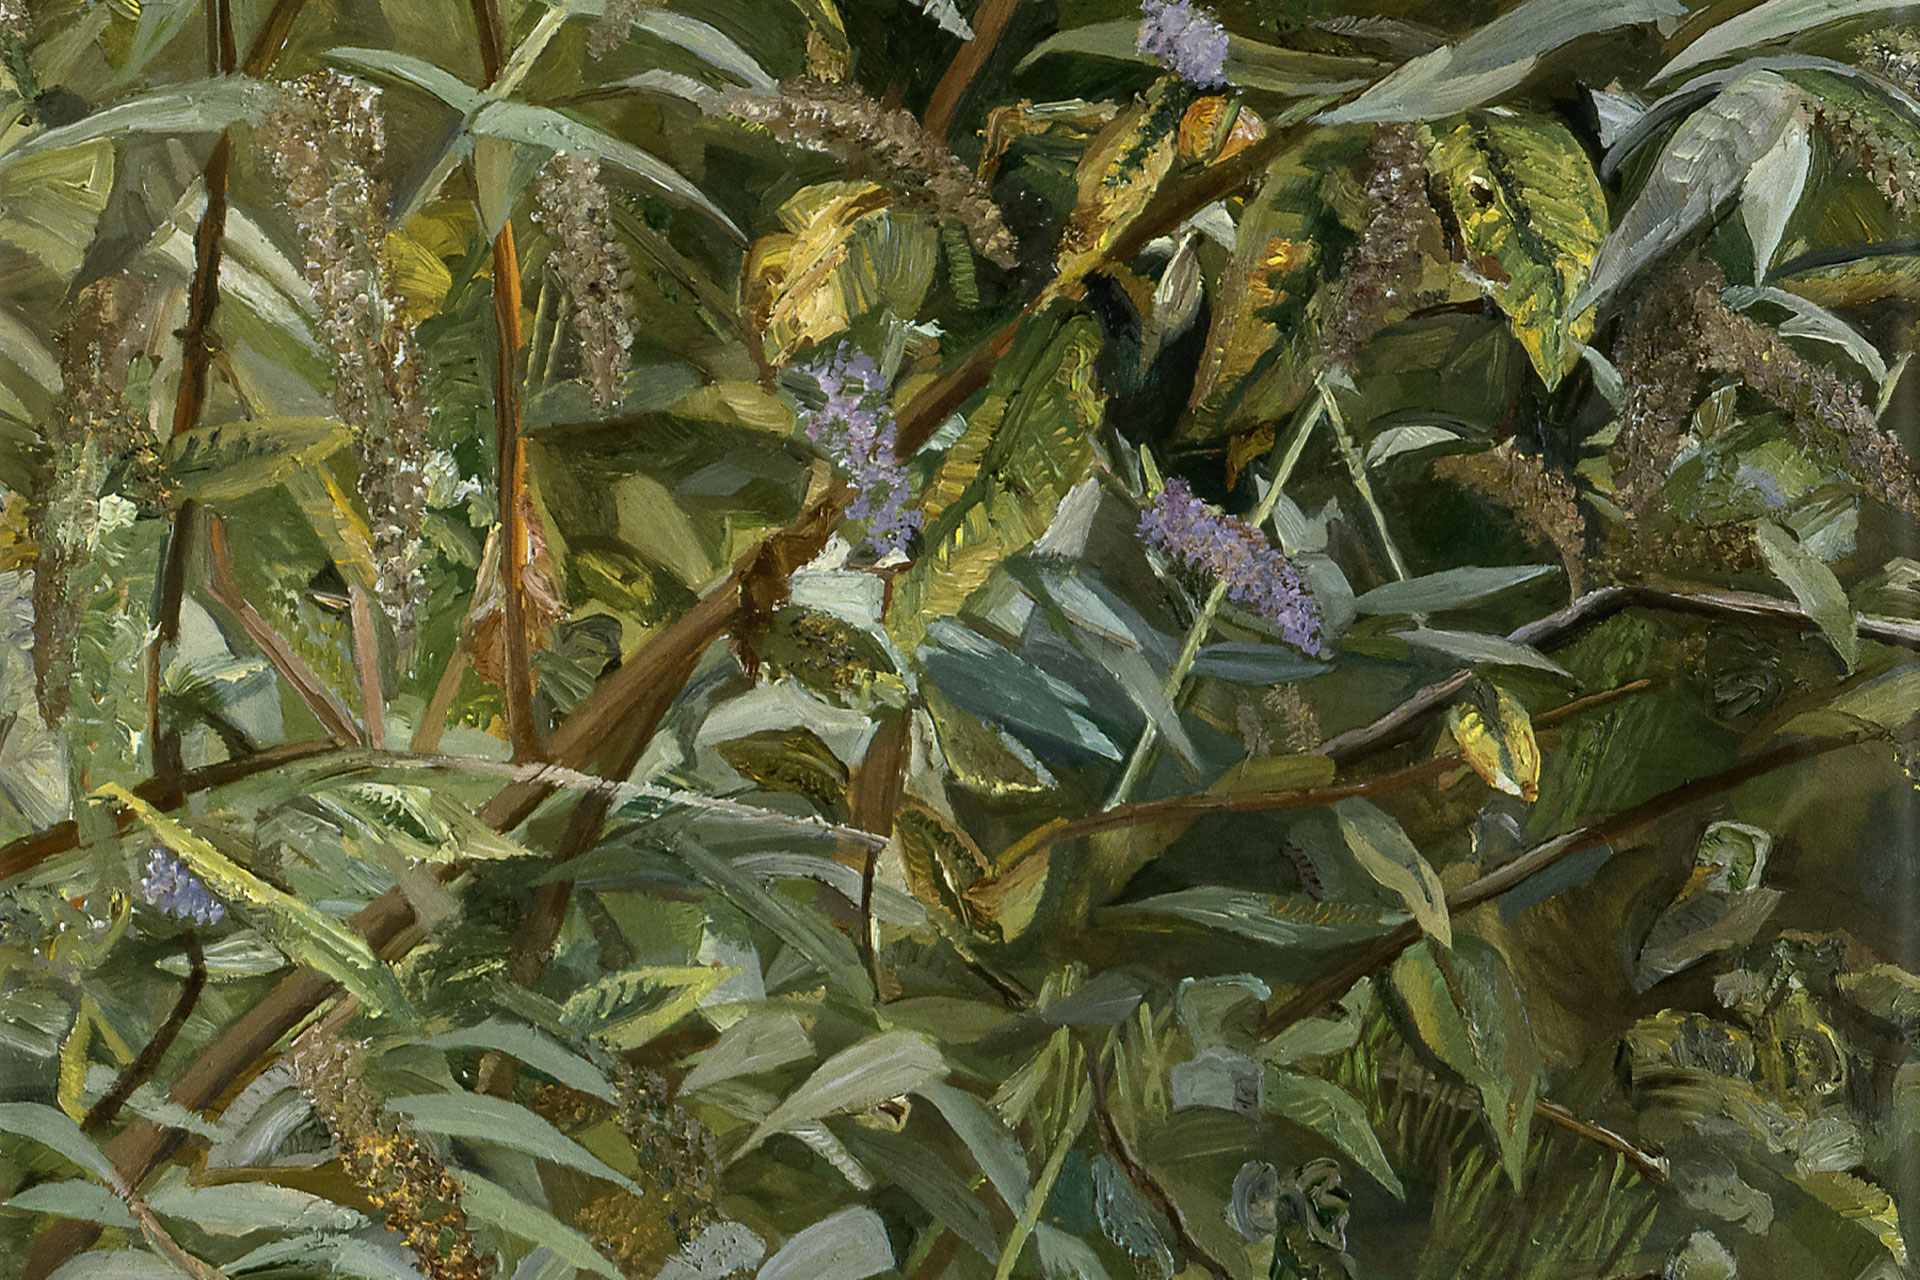 a painting of leaves by Lucian Freud, which is the cover of Phadion's new book about the 20th Century artist